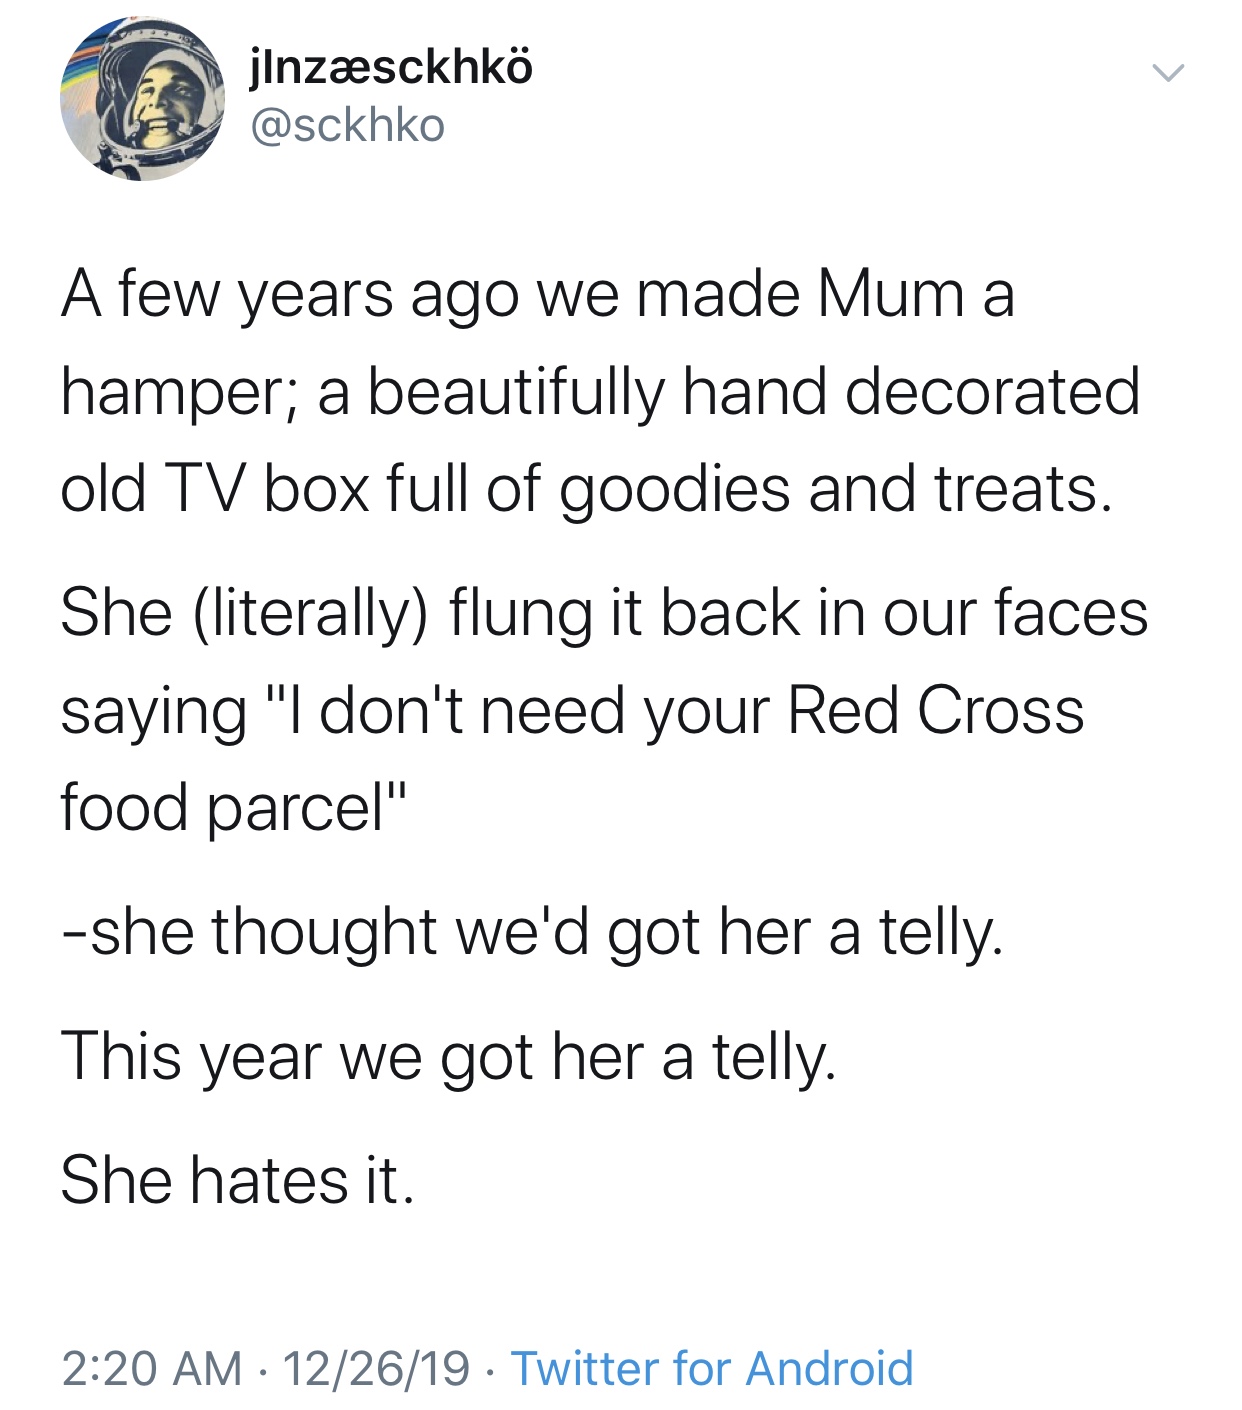 BTS - jlnzsckhk A few years ago we made Mum a hamper; a beautifully hand decorated old Tv box full of goodies and treats. She literally flung it back in our faces saying "I don't need your Red Cross food parcel" she thought we'd got her a telly. This year